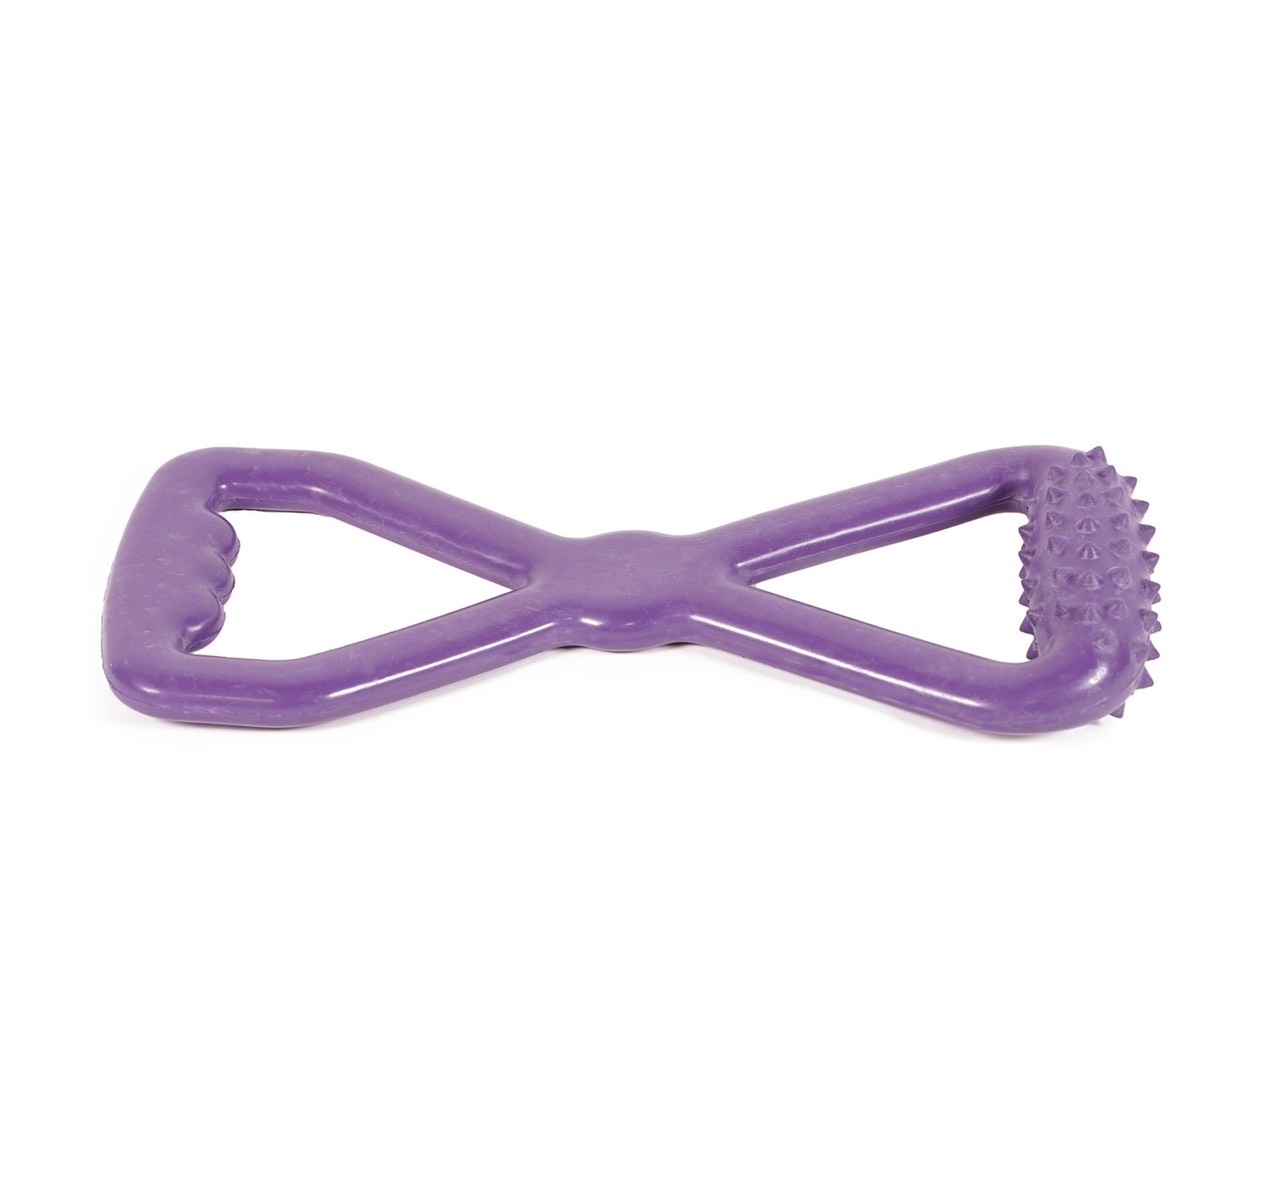 Buy Iddy Rubber Dog Tug Toy Online in Dubai | Paws & Claws